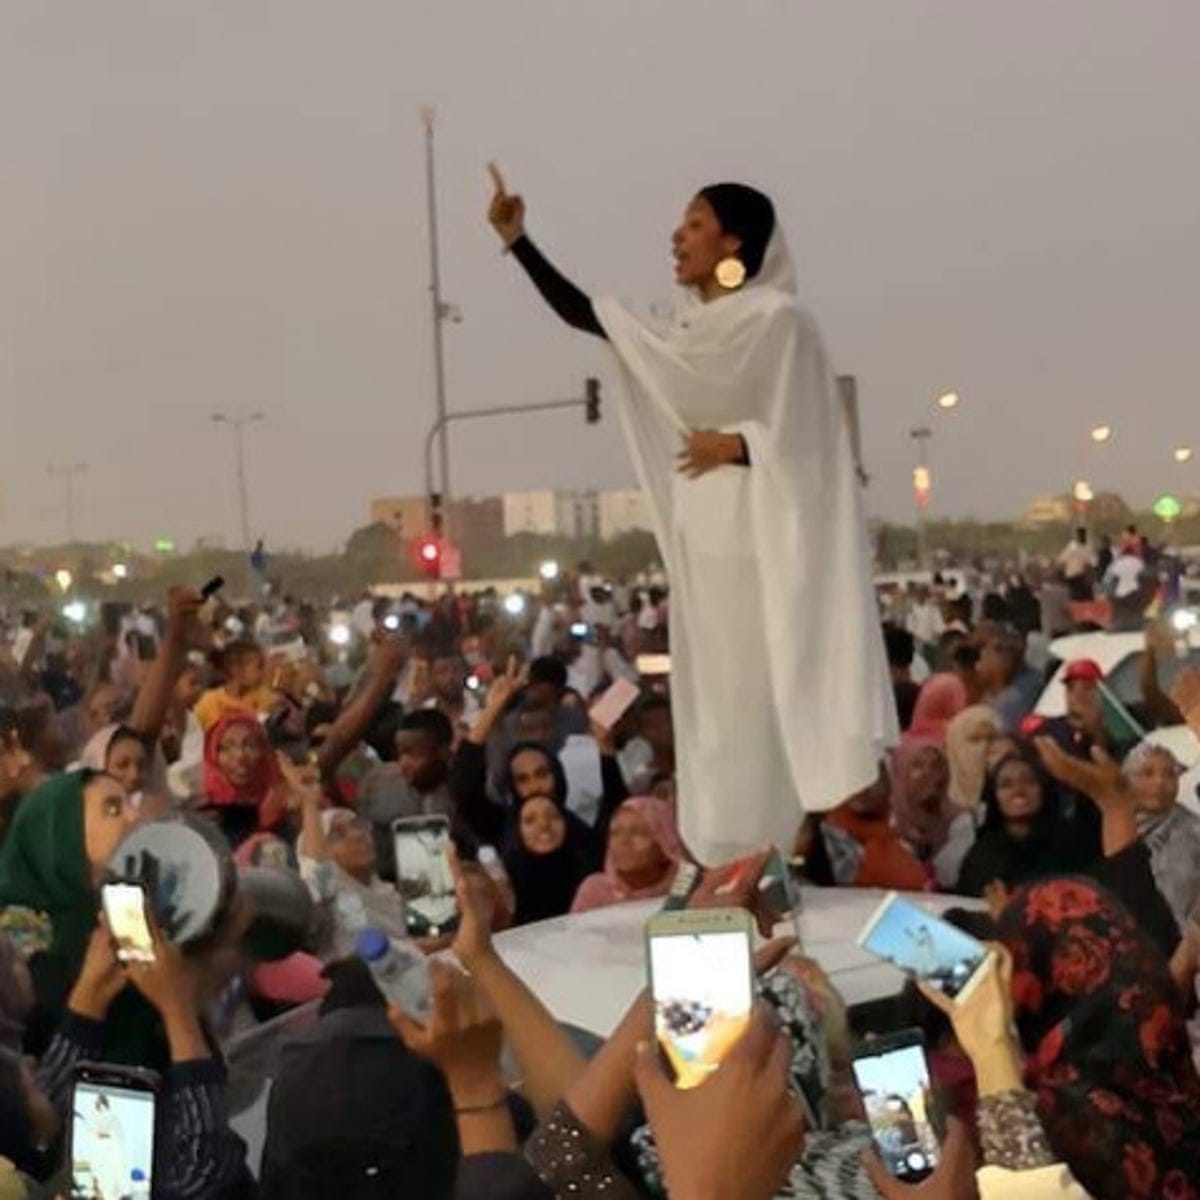 I was raised to love our home': Sudan's singing protester speaks out |  Sudan | The Guardian